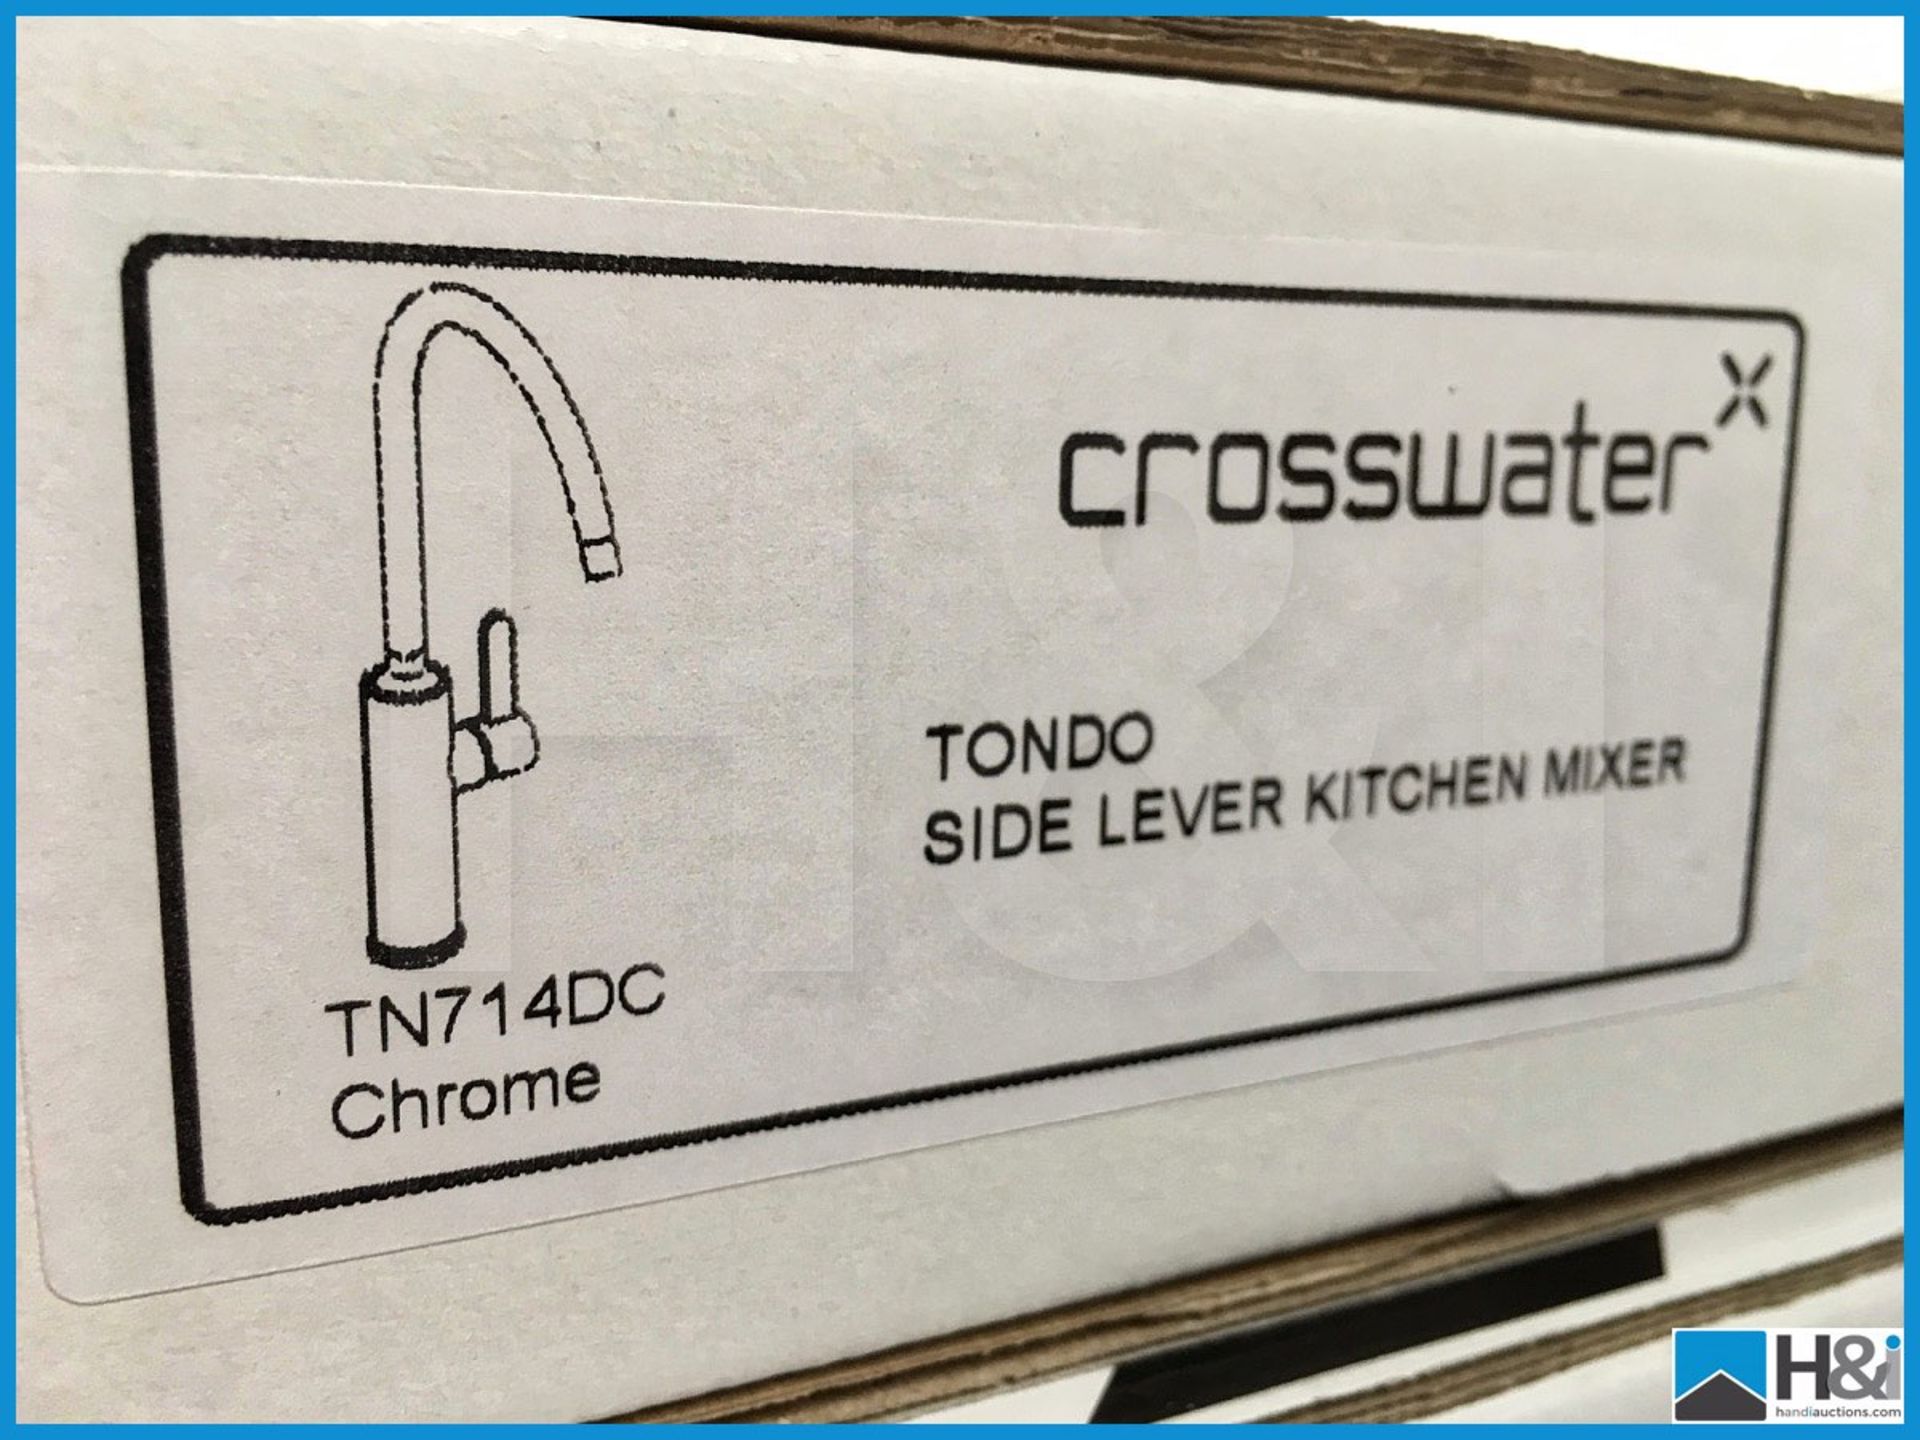 Designer Crosswater NT714DC Tondo curved spout side lever kitchen mixer in polished chrome finish. - Image 4 of 5